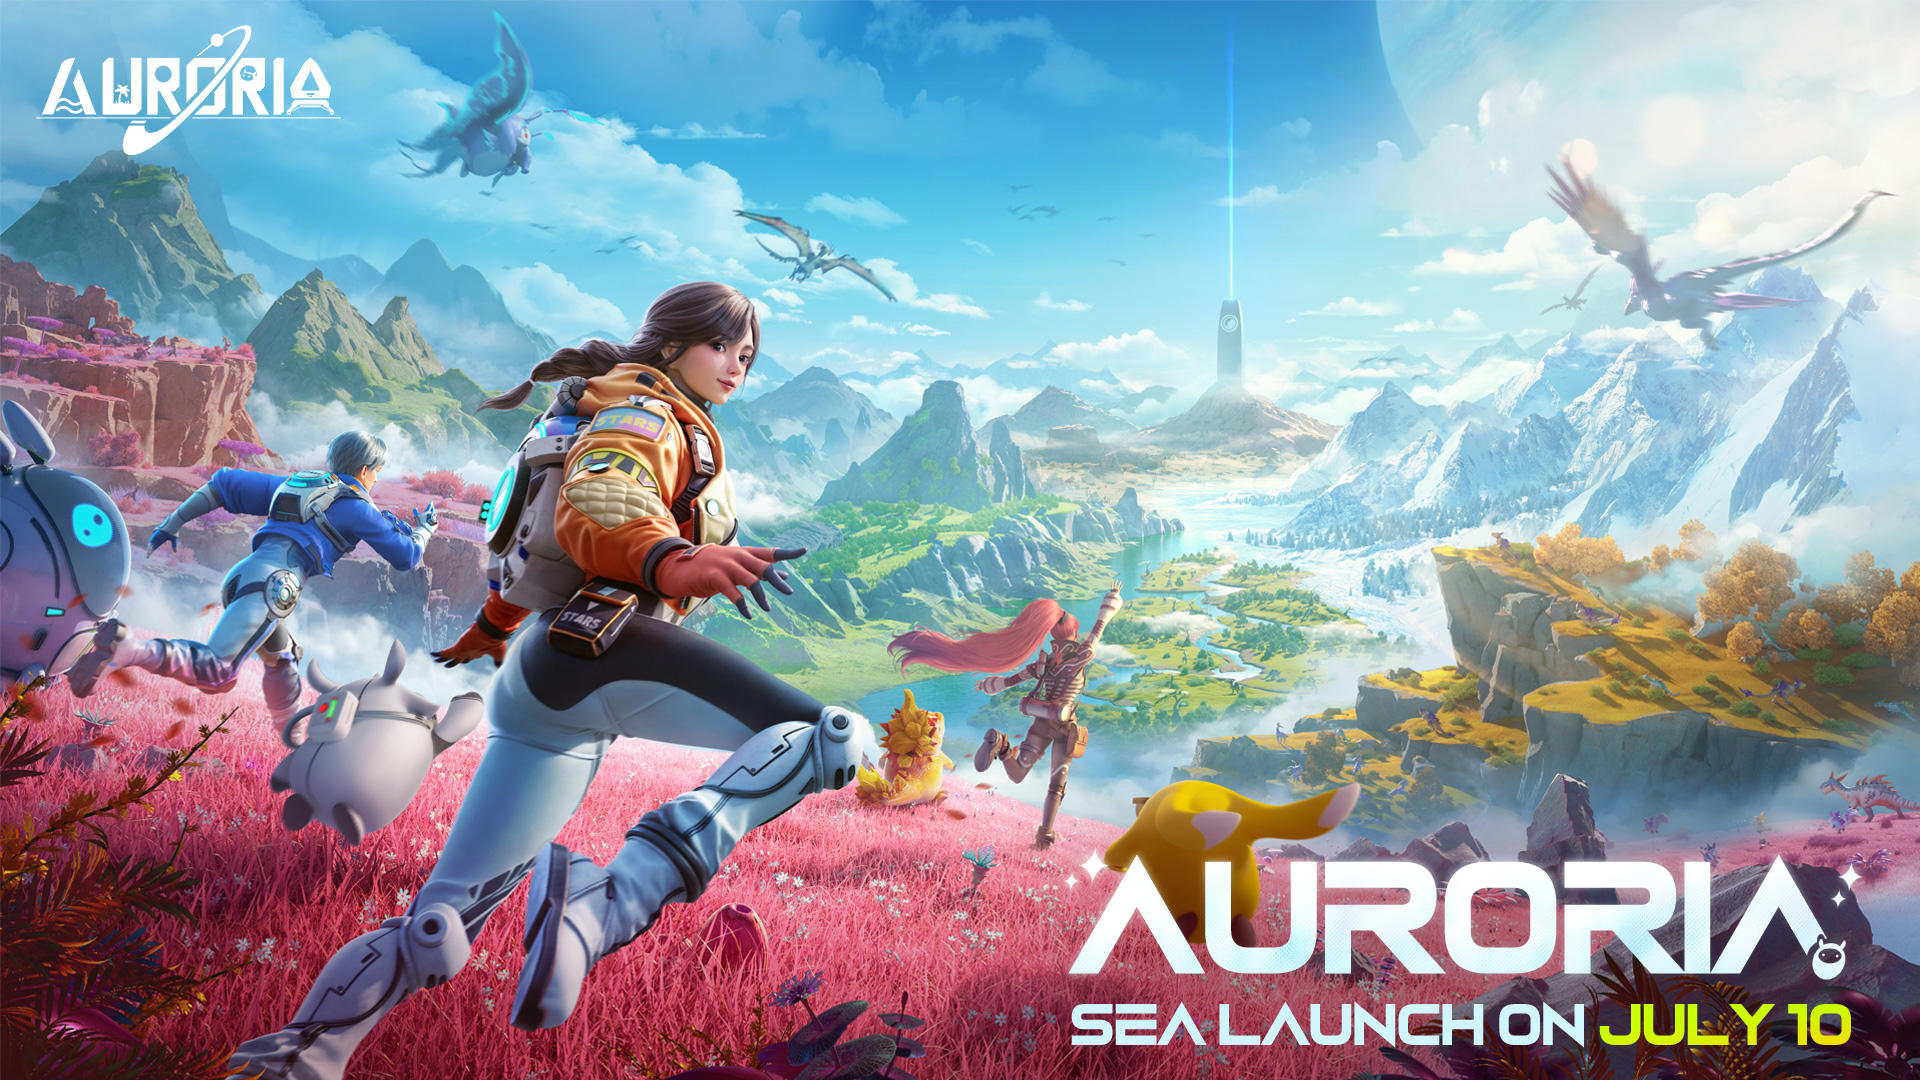 Auroria officially launch in Southeast Asia on July 10th! 🌌